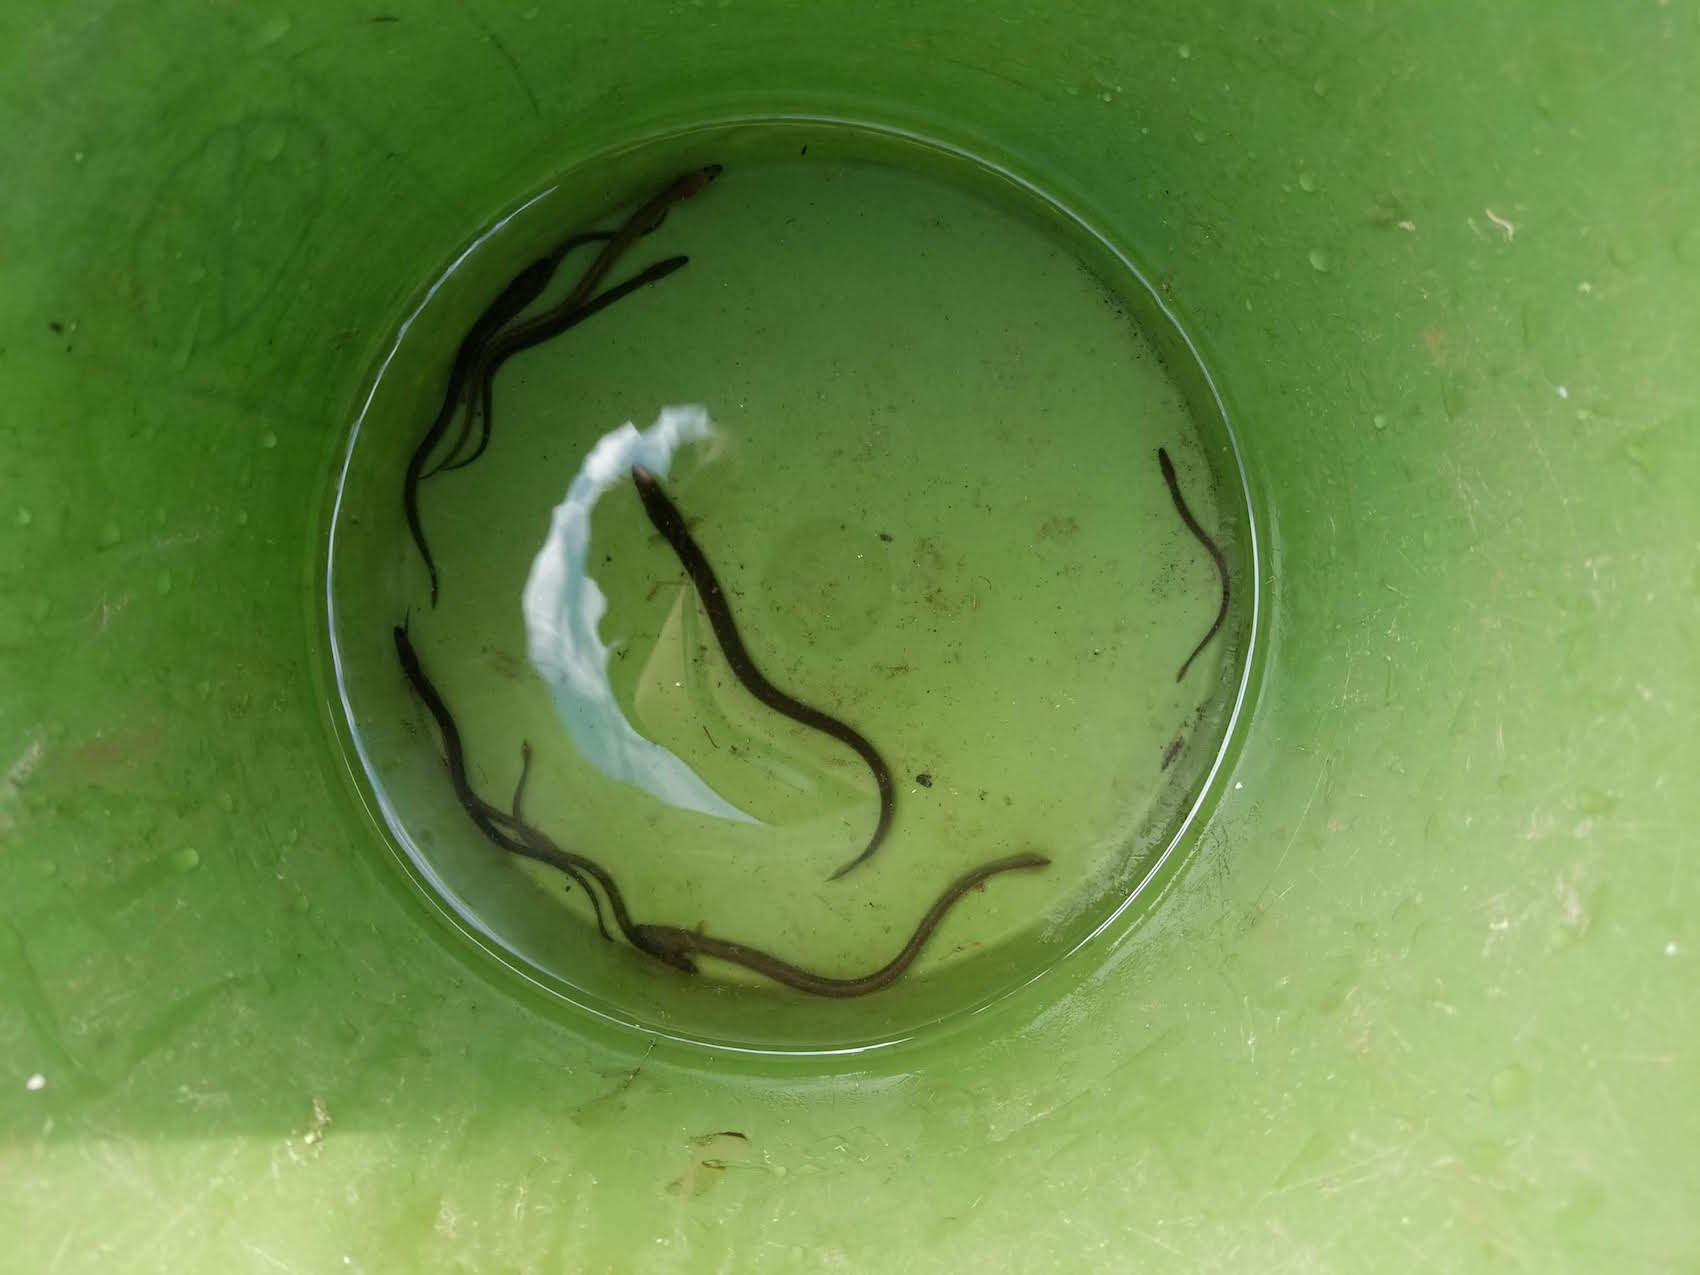 Juvenile Eel in bucket waiting to be brought around the dam